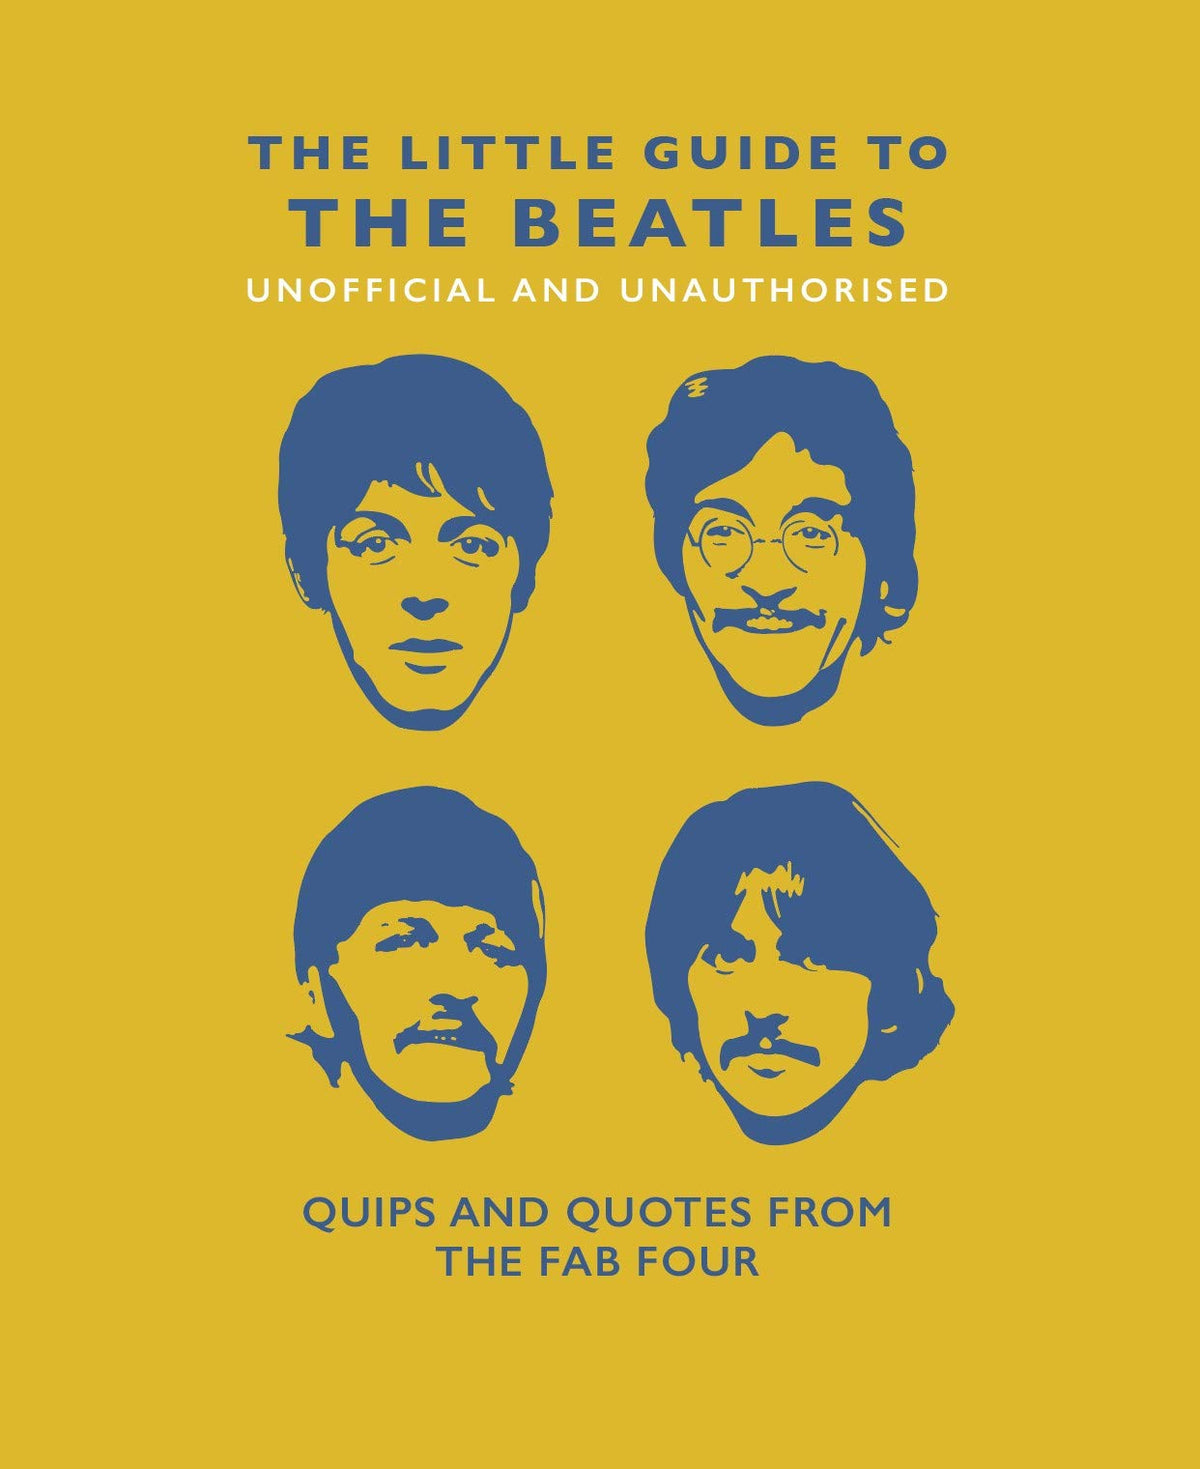 Little Guide to the Beatles